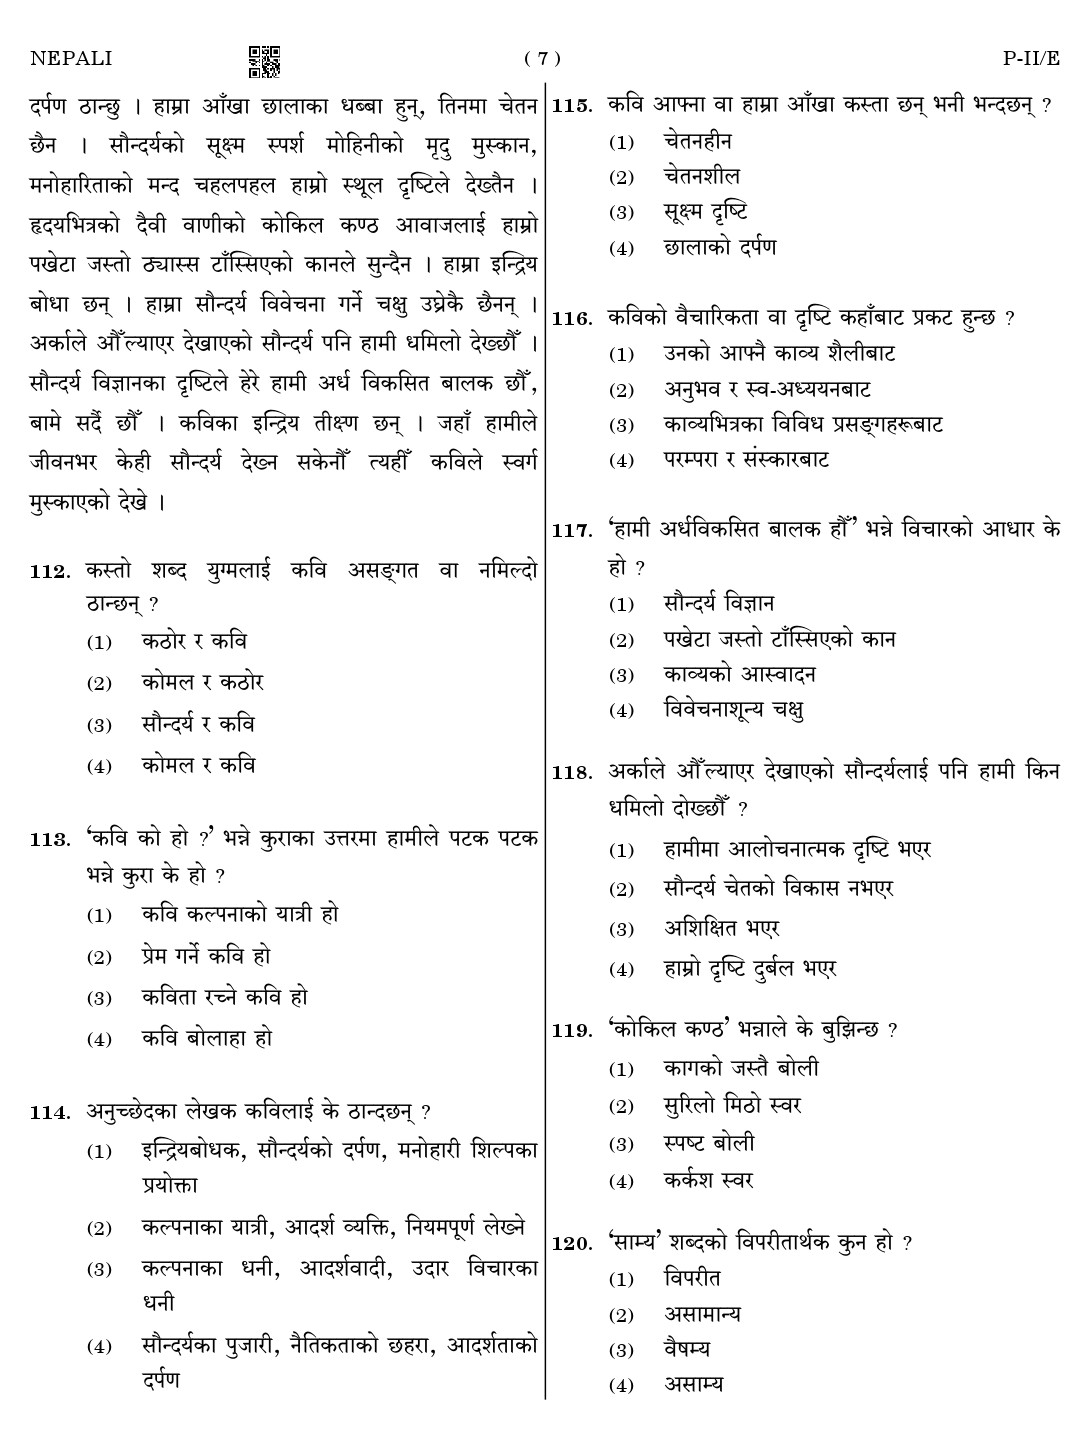 CTET August 2023 Nepali Language Supplement Paper II Part IV and V 7